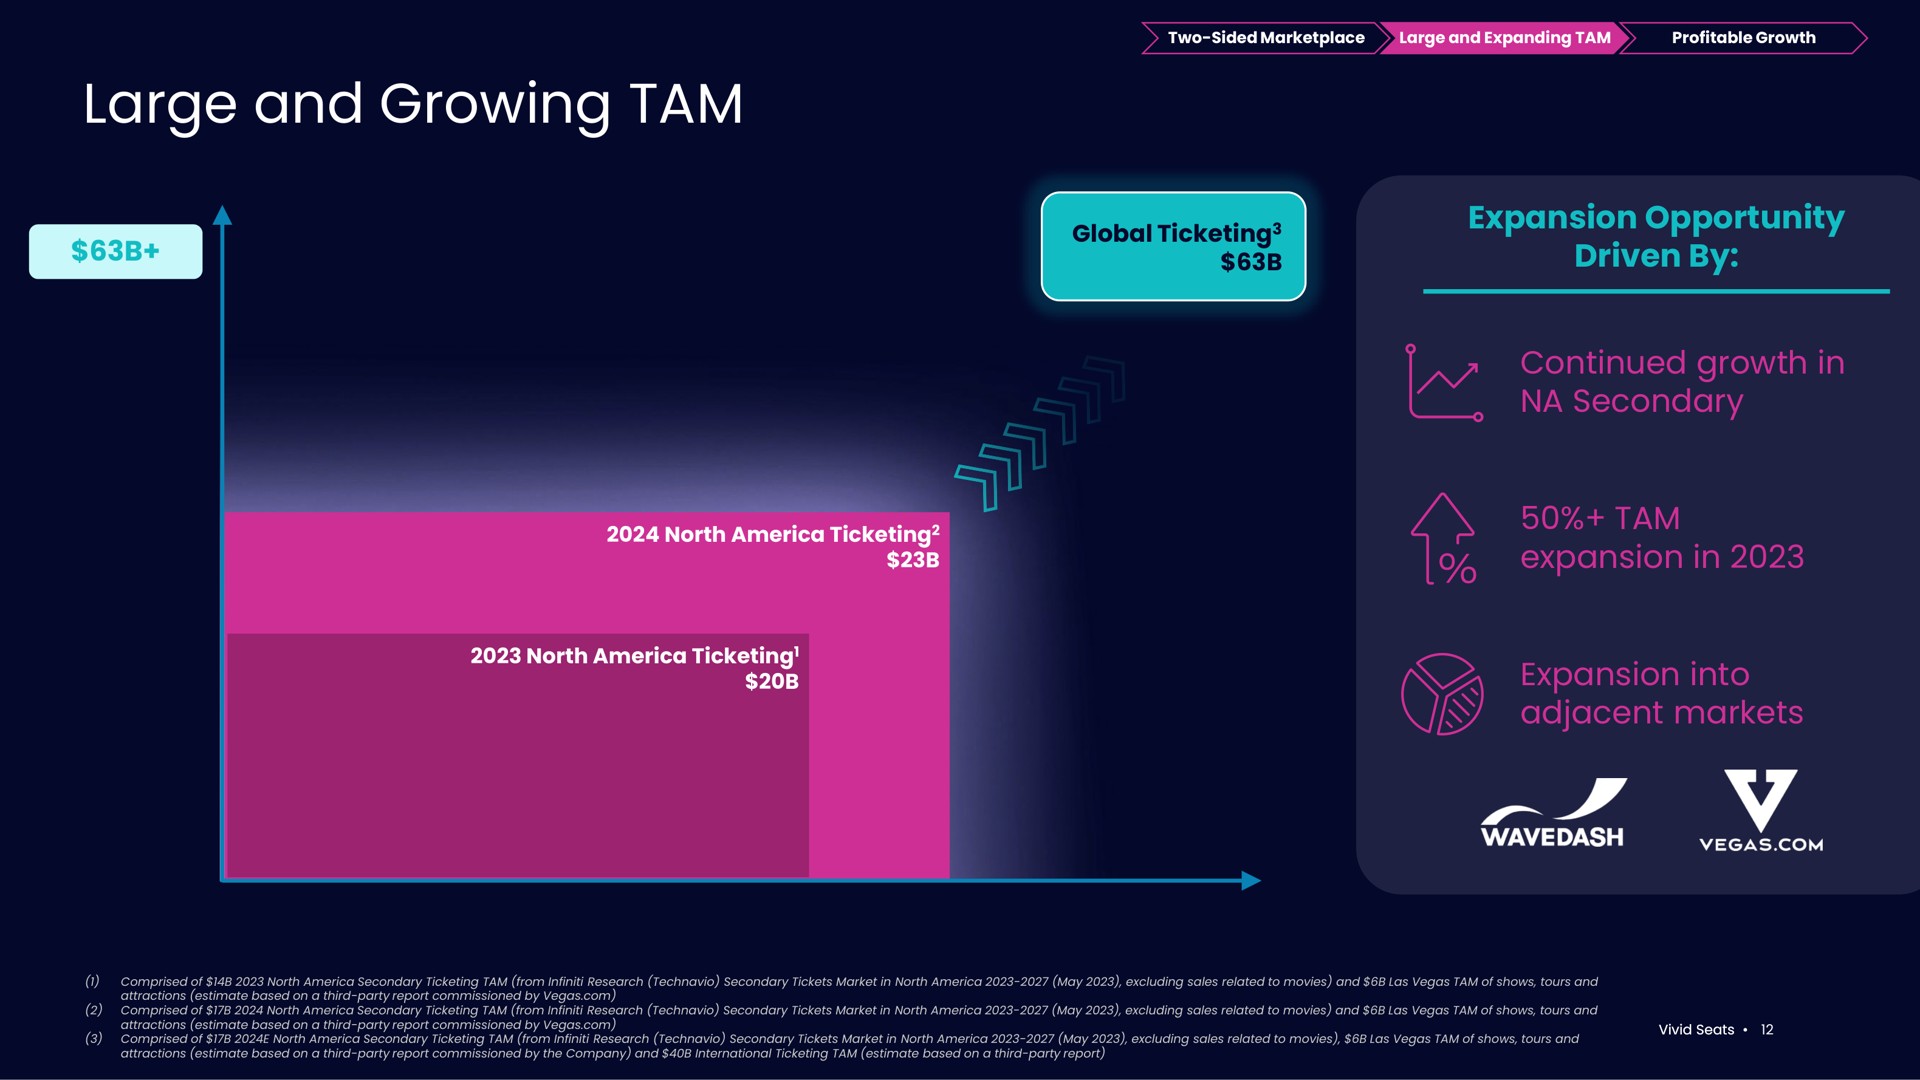 large and growing tam | Vivid Seats